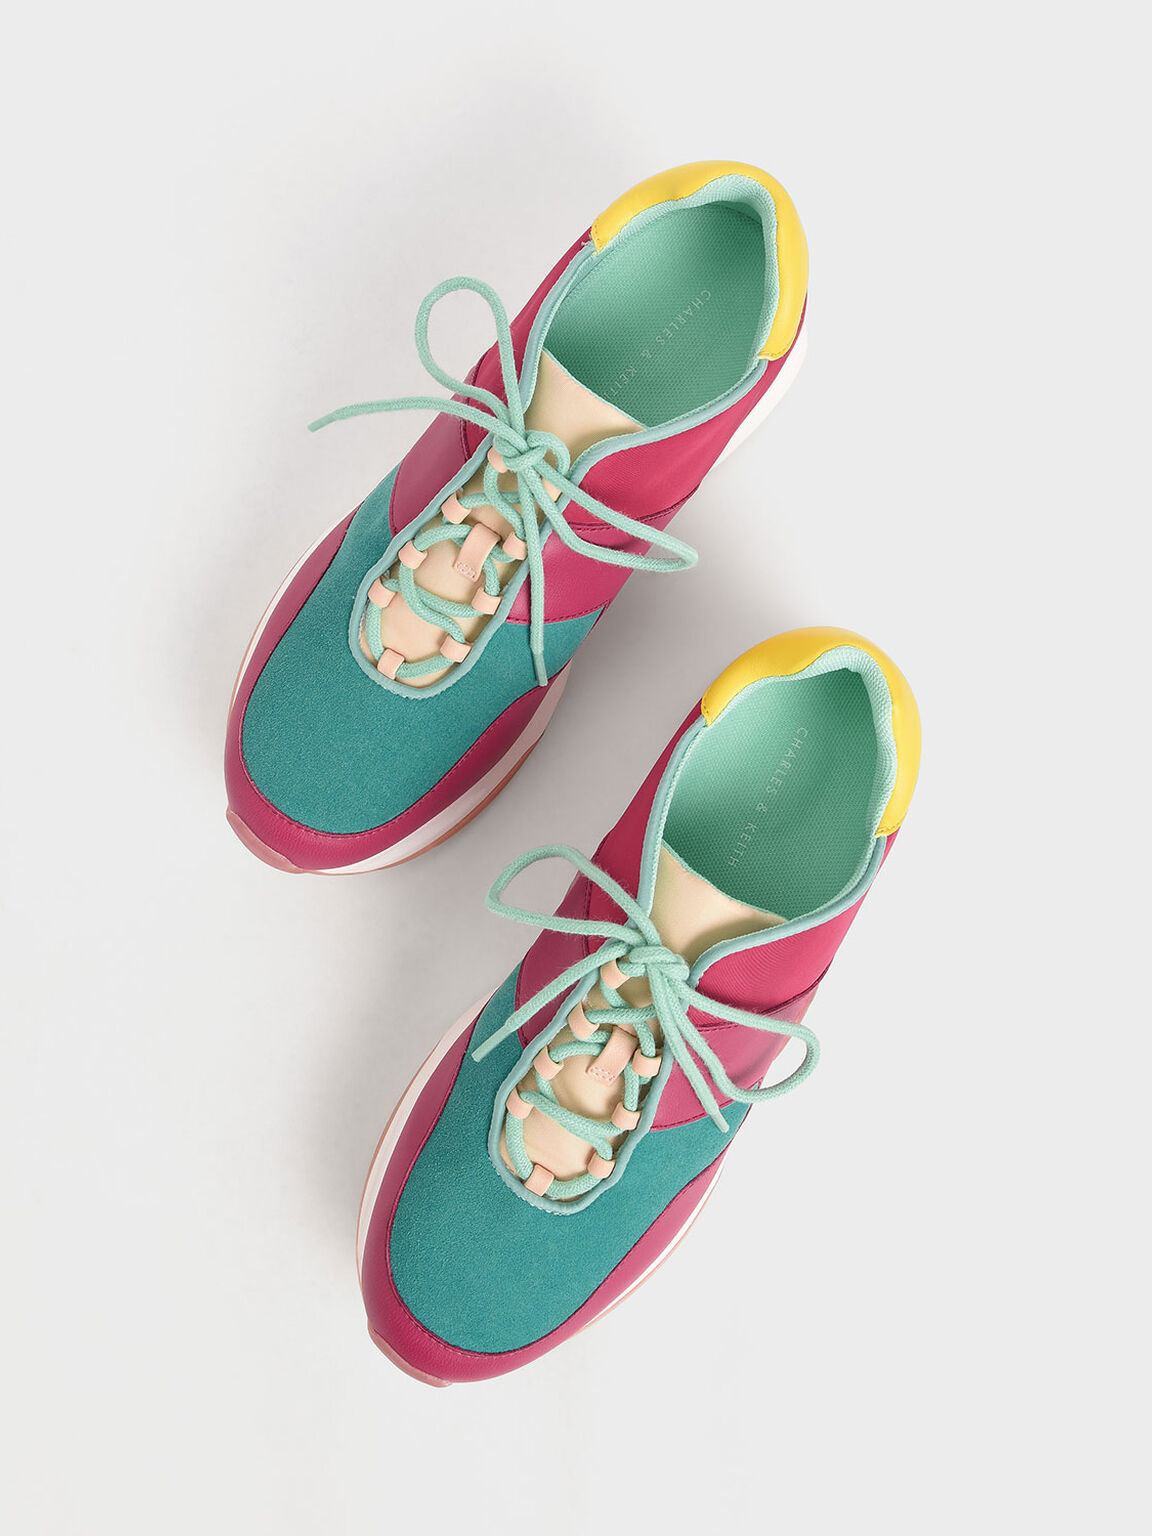 Textured Lace-Up Sneakers, Teal, hi-res